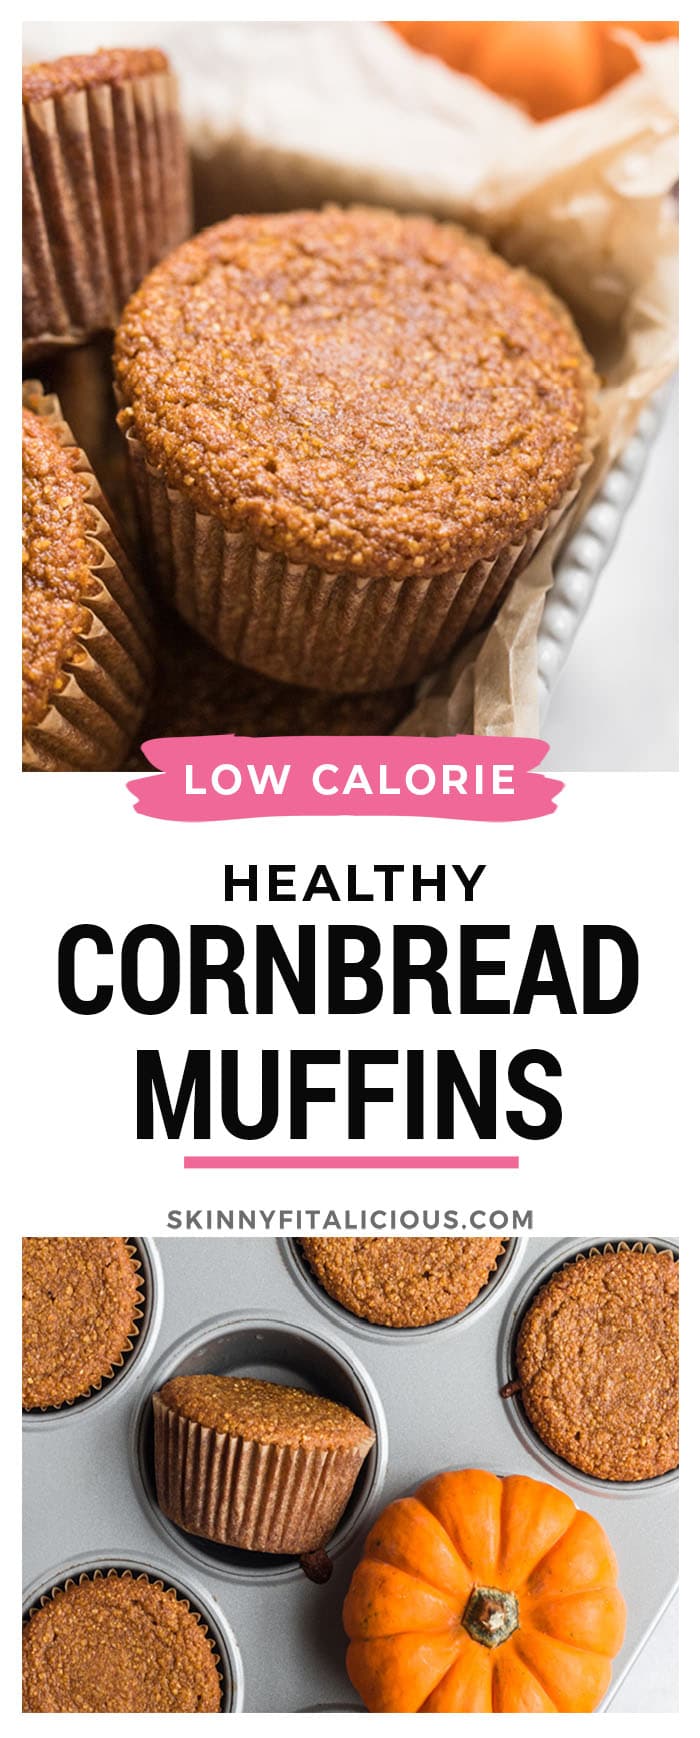 Healthy Pumpkin Cornbread Muffins made low calorie, gluten free and vegan with less sugar. Pumpkin makes this healthy cornbread recipe lighter, more nutritious and flavorful! 